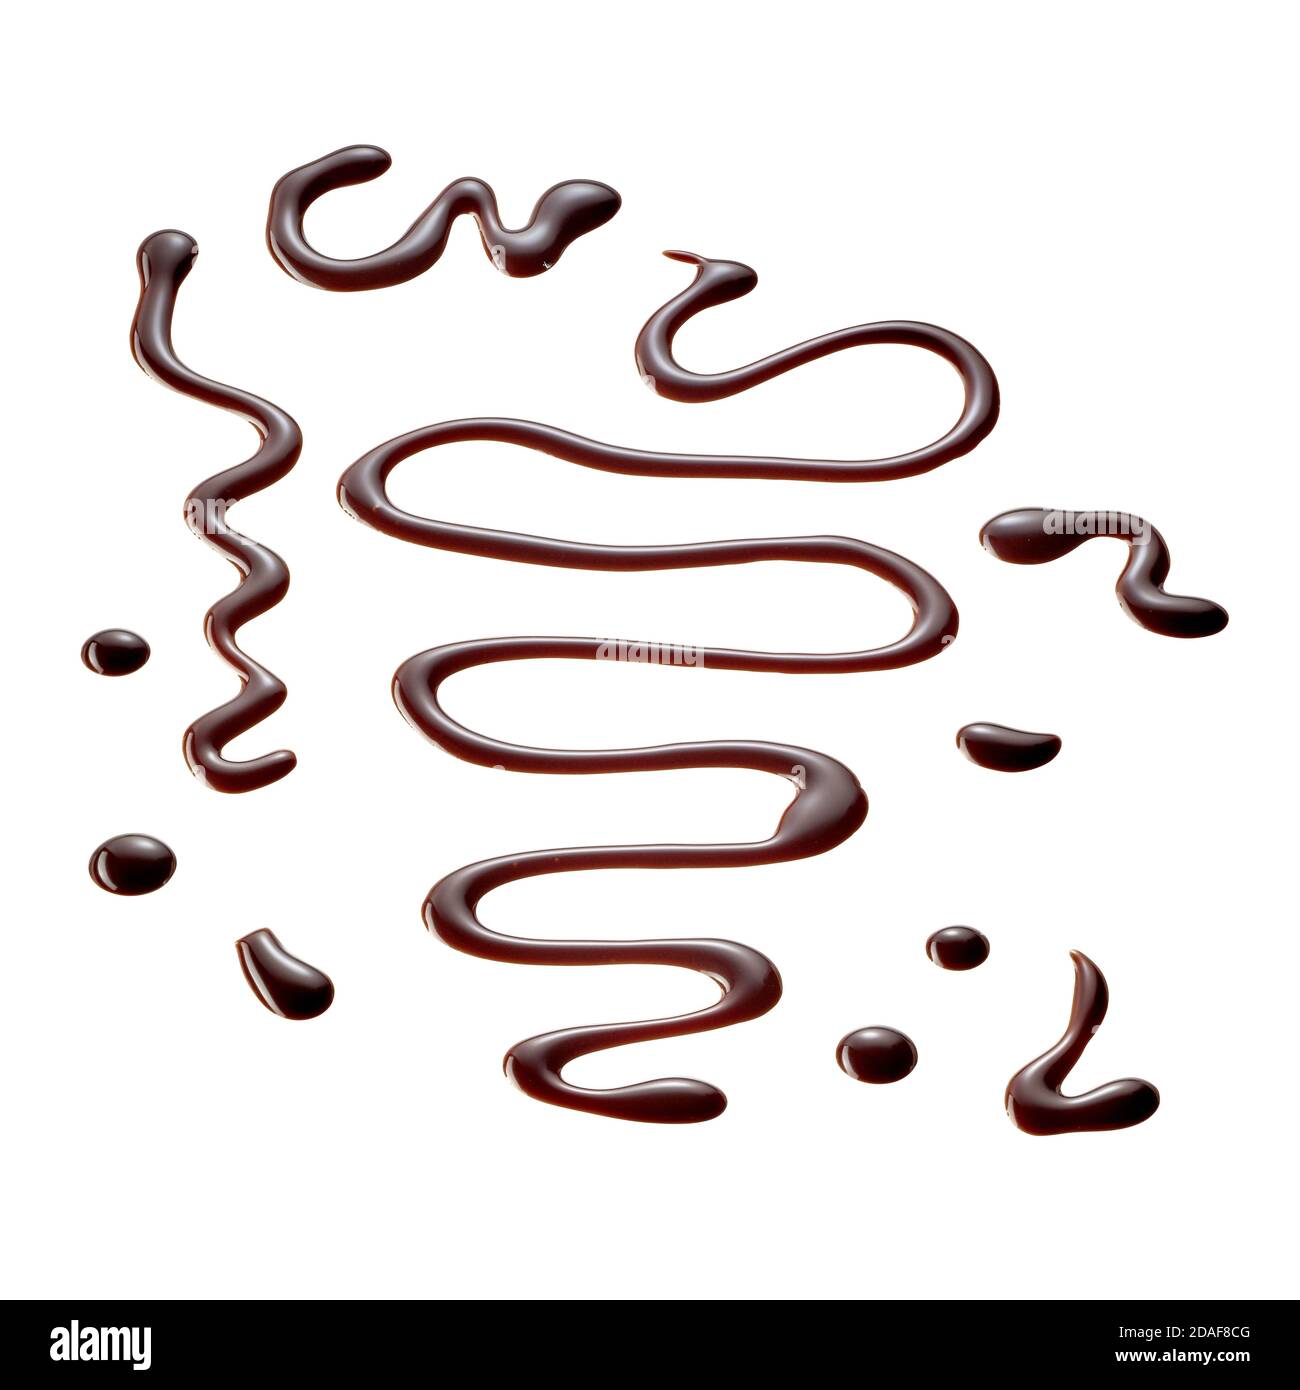 Decorative wavy drizzles, drops and splatters of chocolate sauce isolated on white for use in food styling concepts or advertising Stock Photo